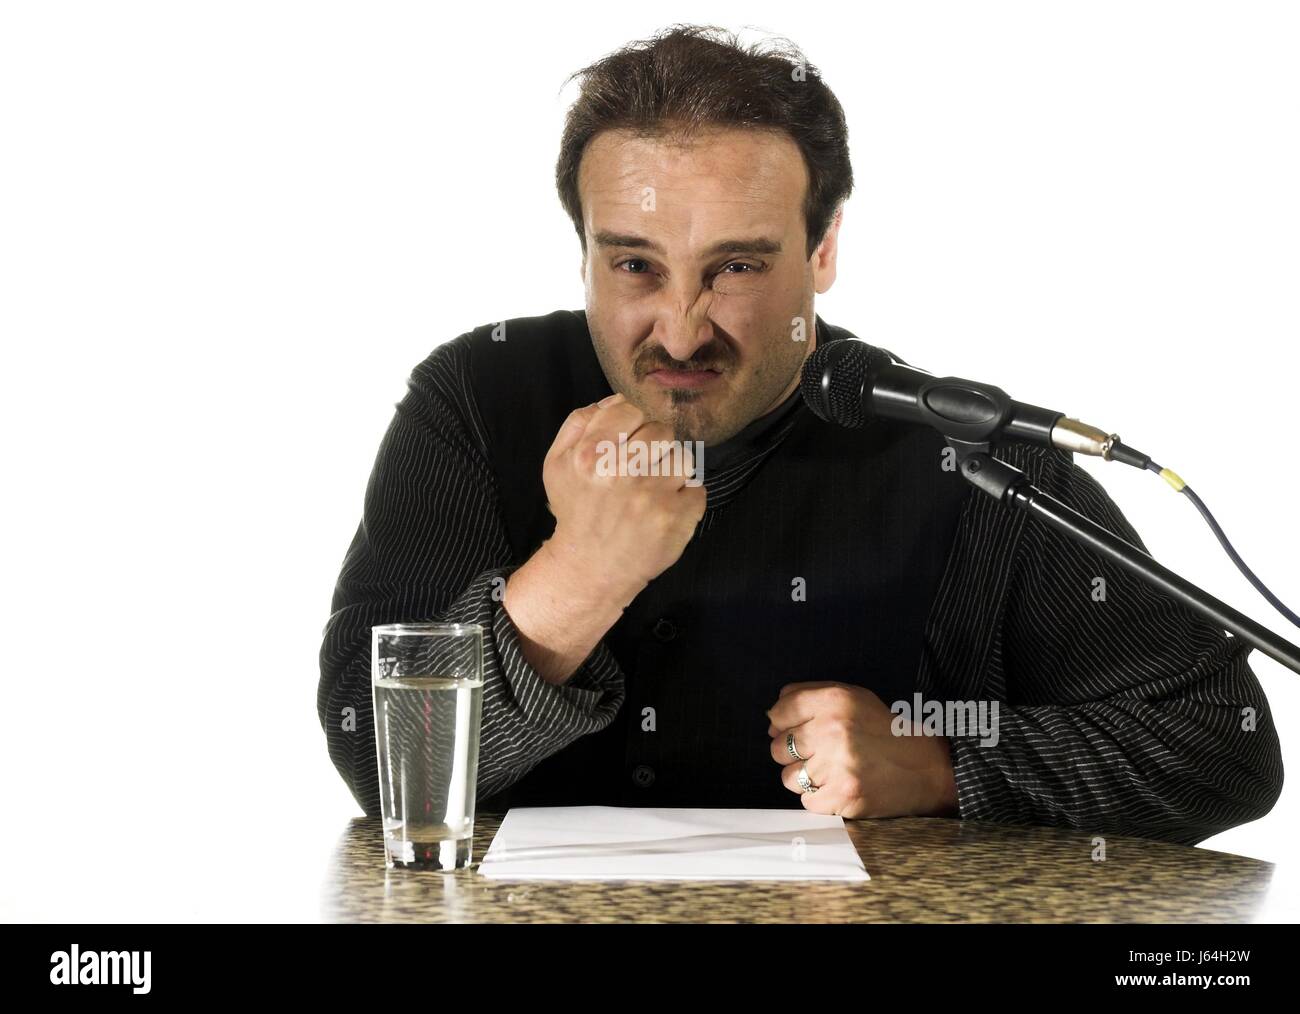 orator microphone angrily annoying agression aggression speech man seminar loud Stock Photo